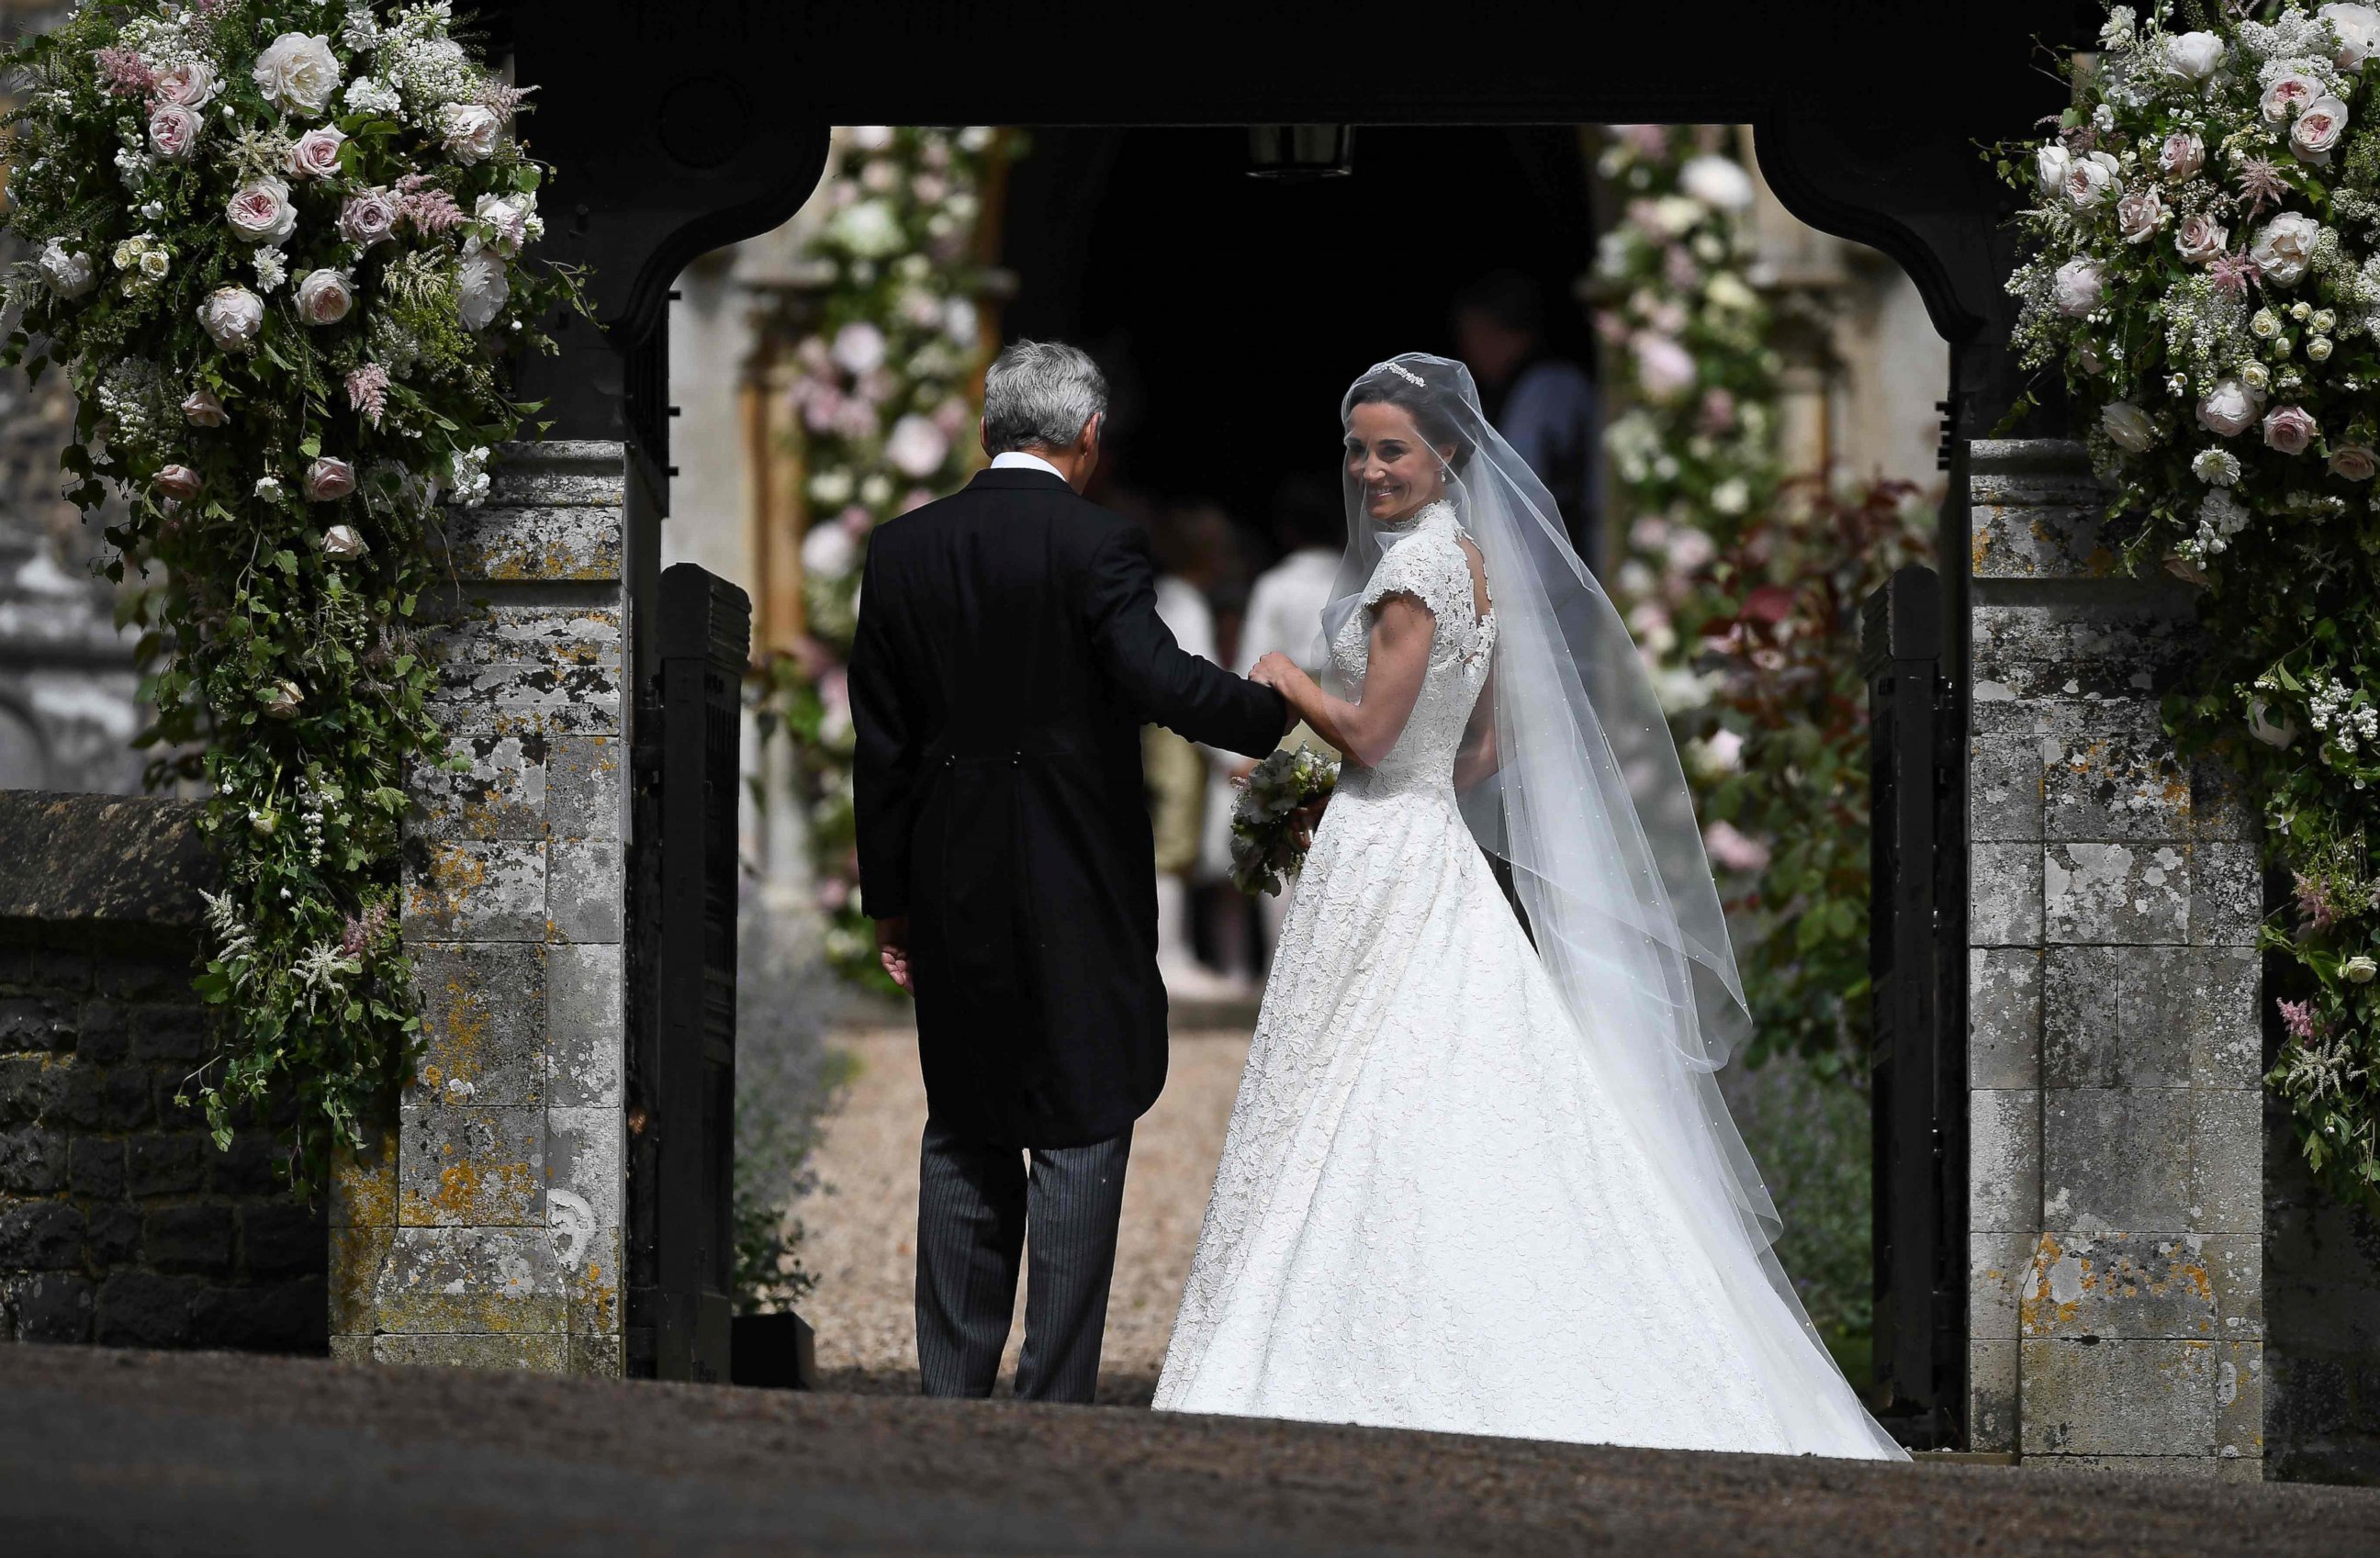 PHOTO: Pippa Middleton is escorted by her father Michael Middleton, as she arrives for her wedding to James Matthews at St Mark's Church in Englefield, west of London, May 20, 2017.